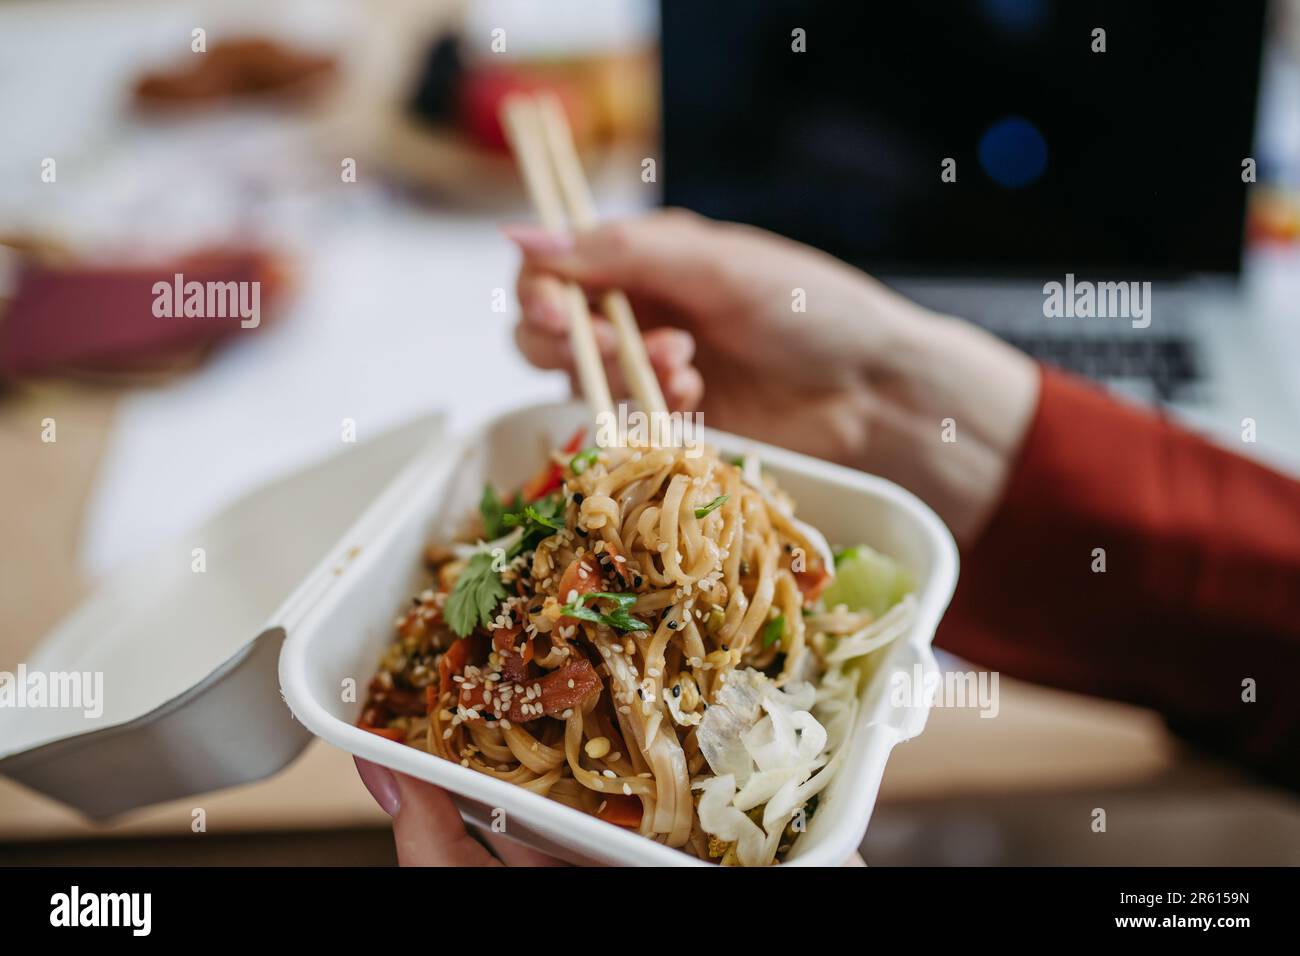 Close up of chinese food, lunch time in an office. Stock Photo